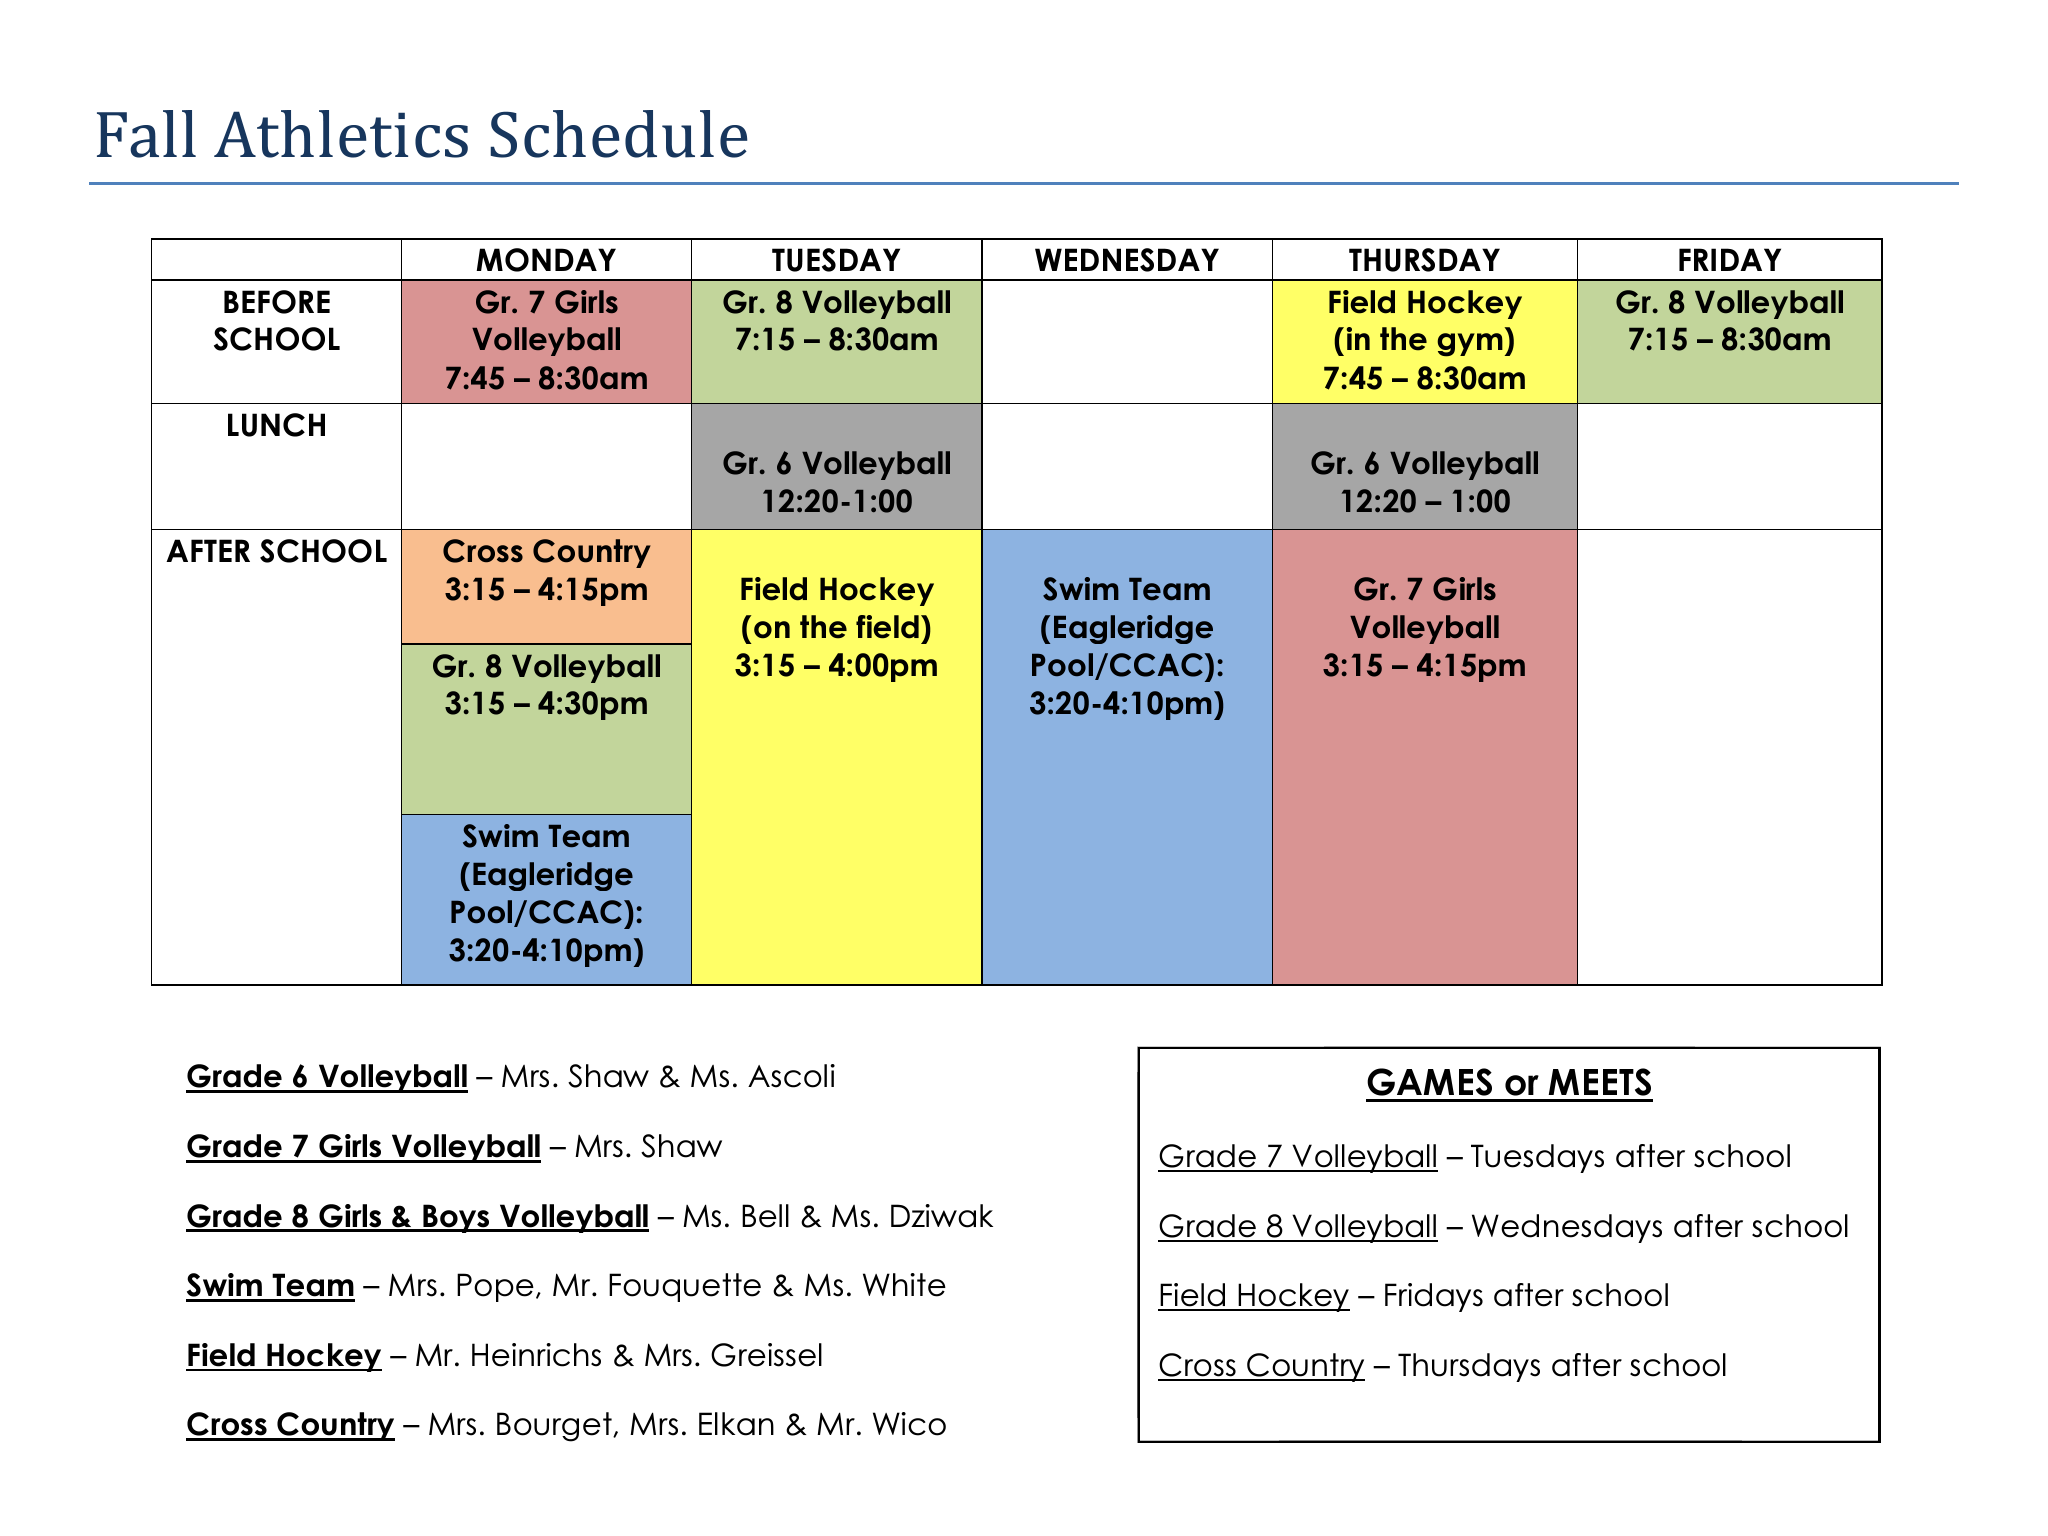 Fall Athletics Schedule.PNG